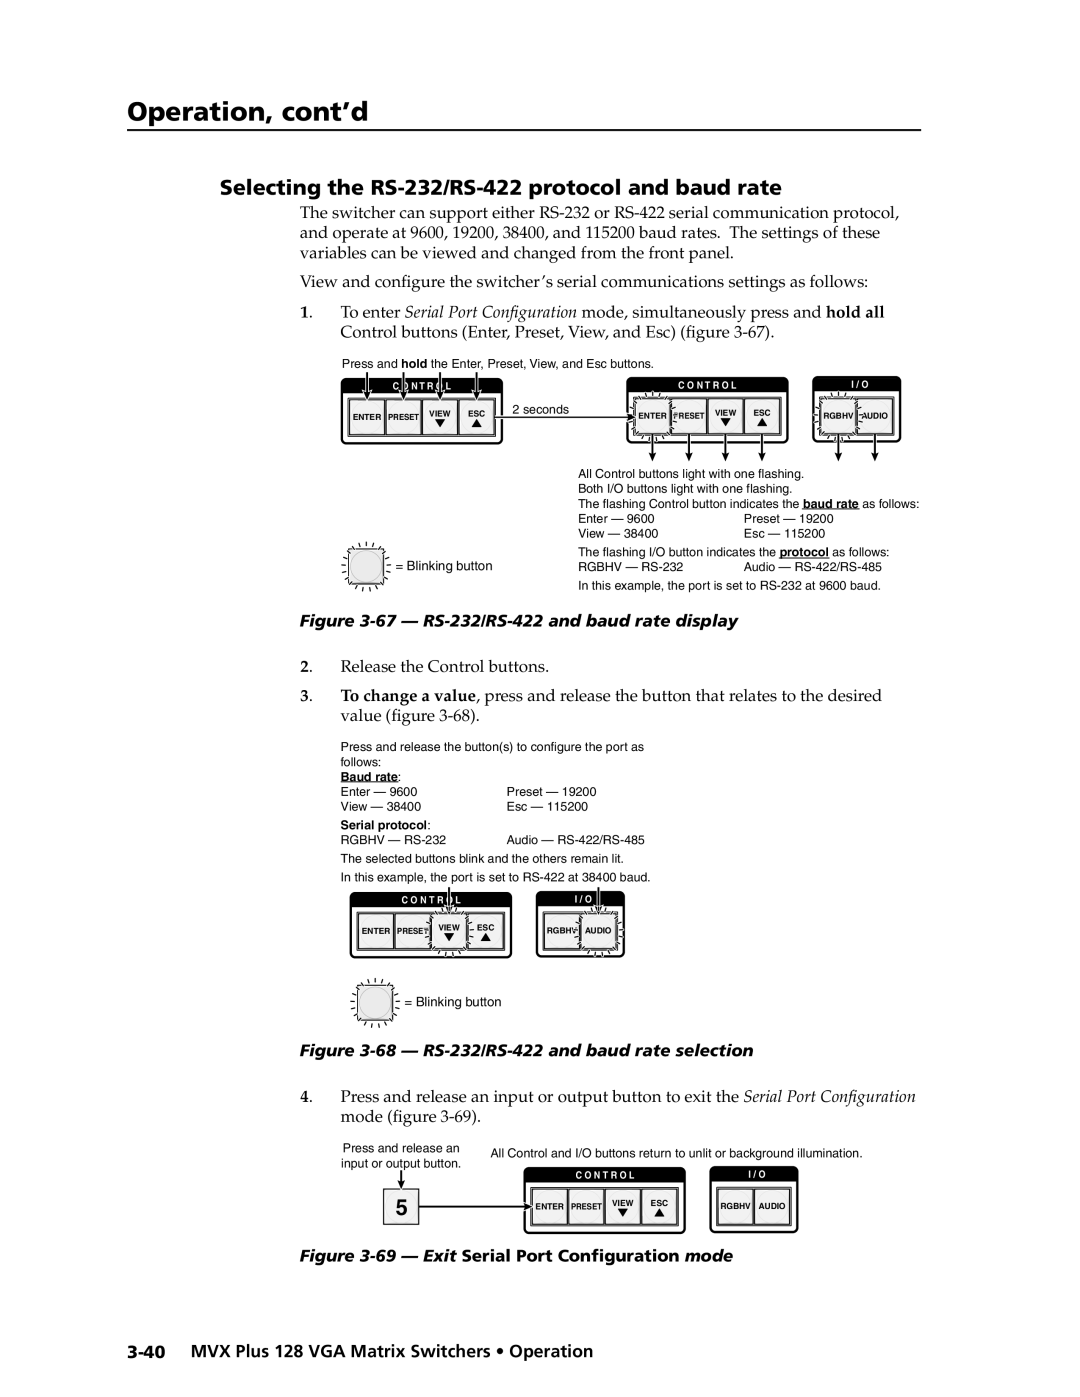 Extron electronic MVX PLUS 128 manual Selecting the RS-232/RS-422 protocol and baud rate, Operation, cont’d 